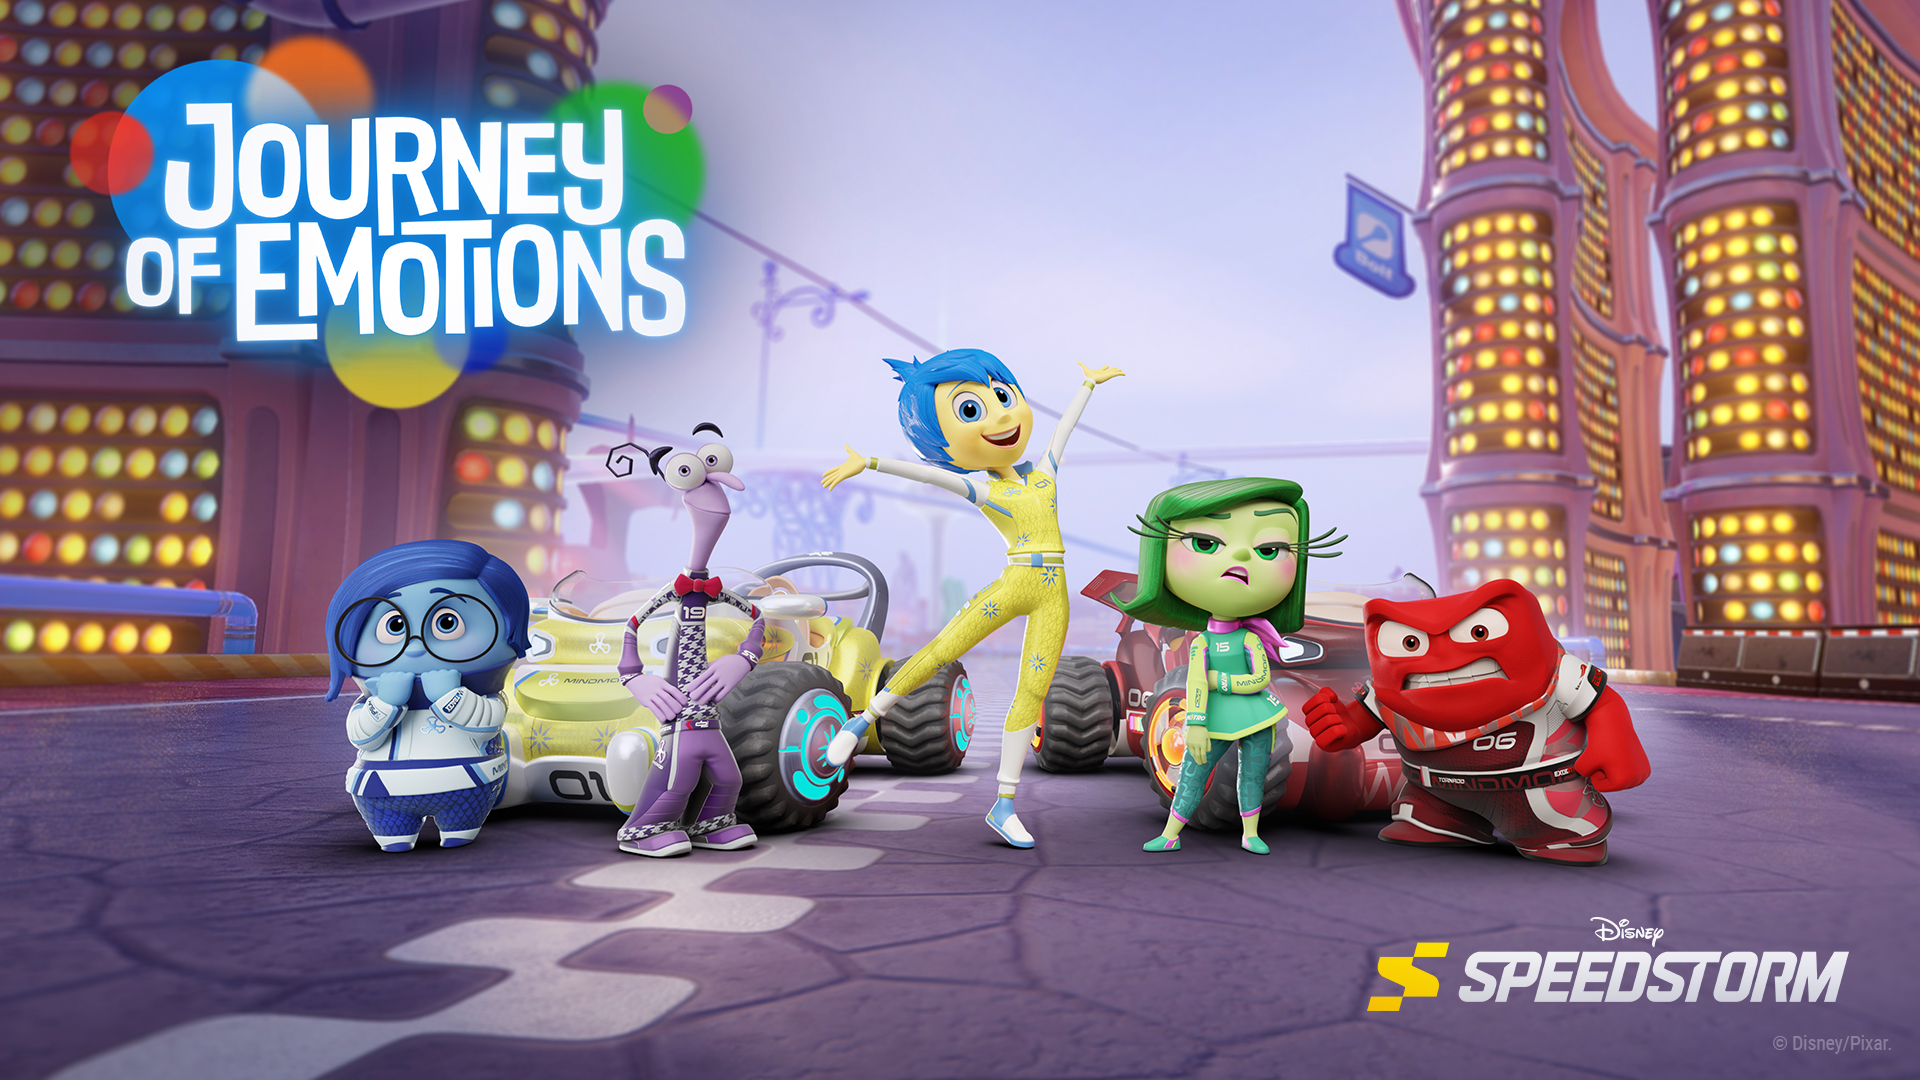 Race with the emotions as Inside Out joins Disney Speedstorm